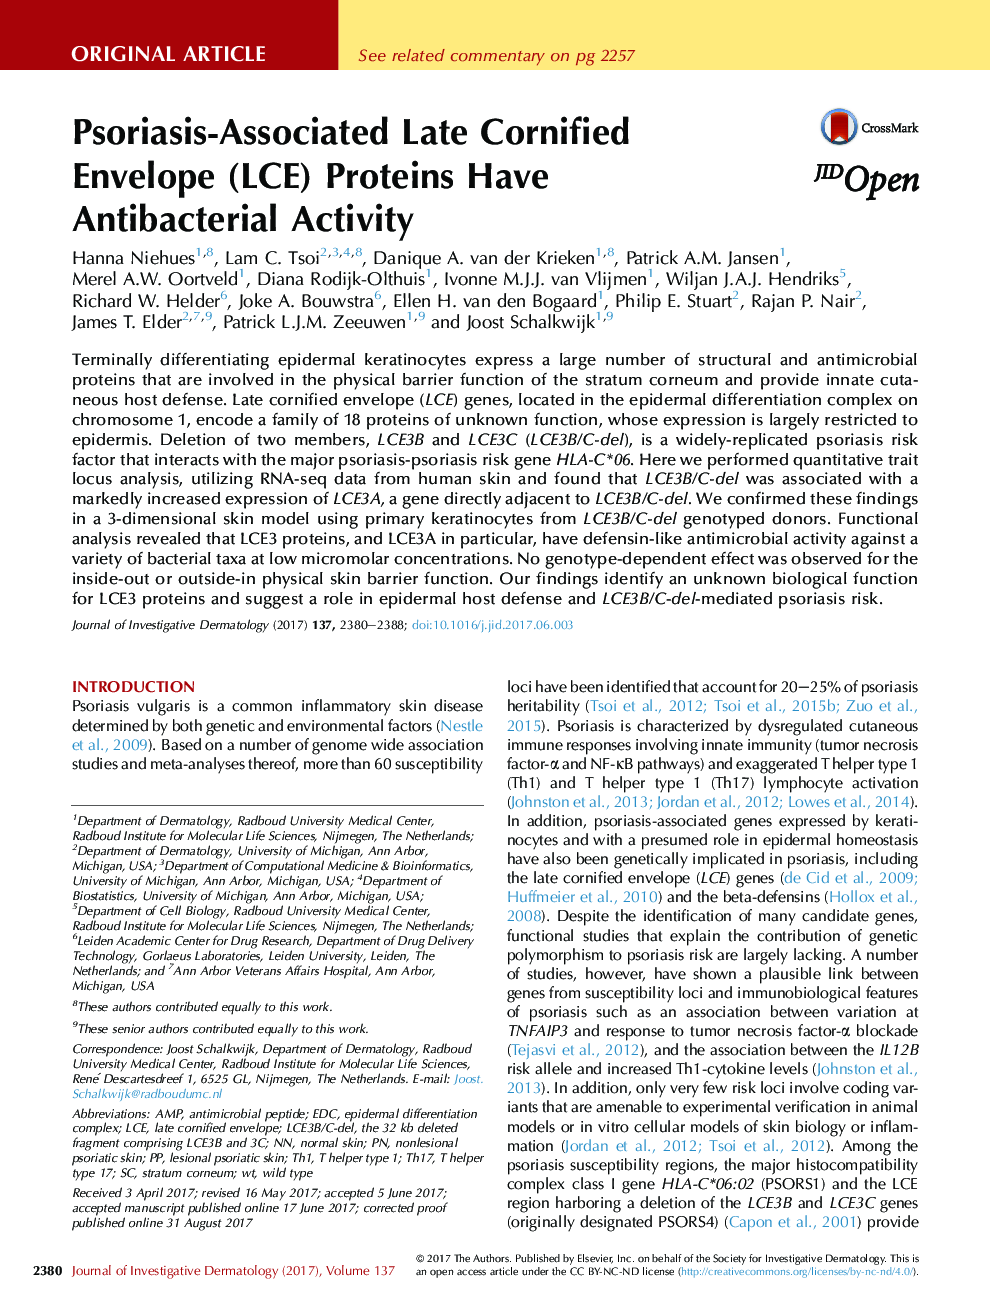 Psoriasis-Associated Late Cornified Envelope (LCE) Proteins Have AntibacterialÂ Activity